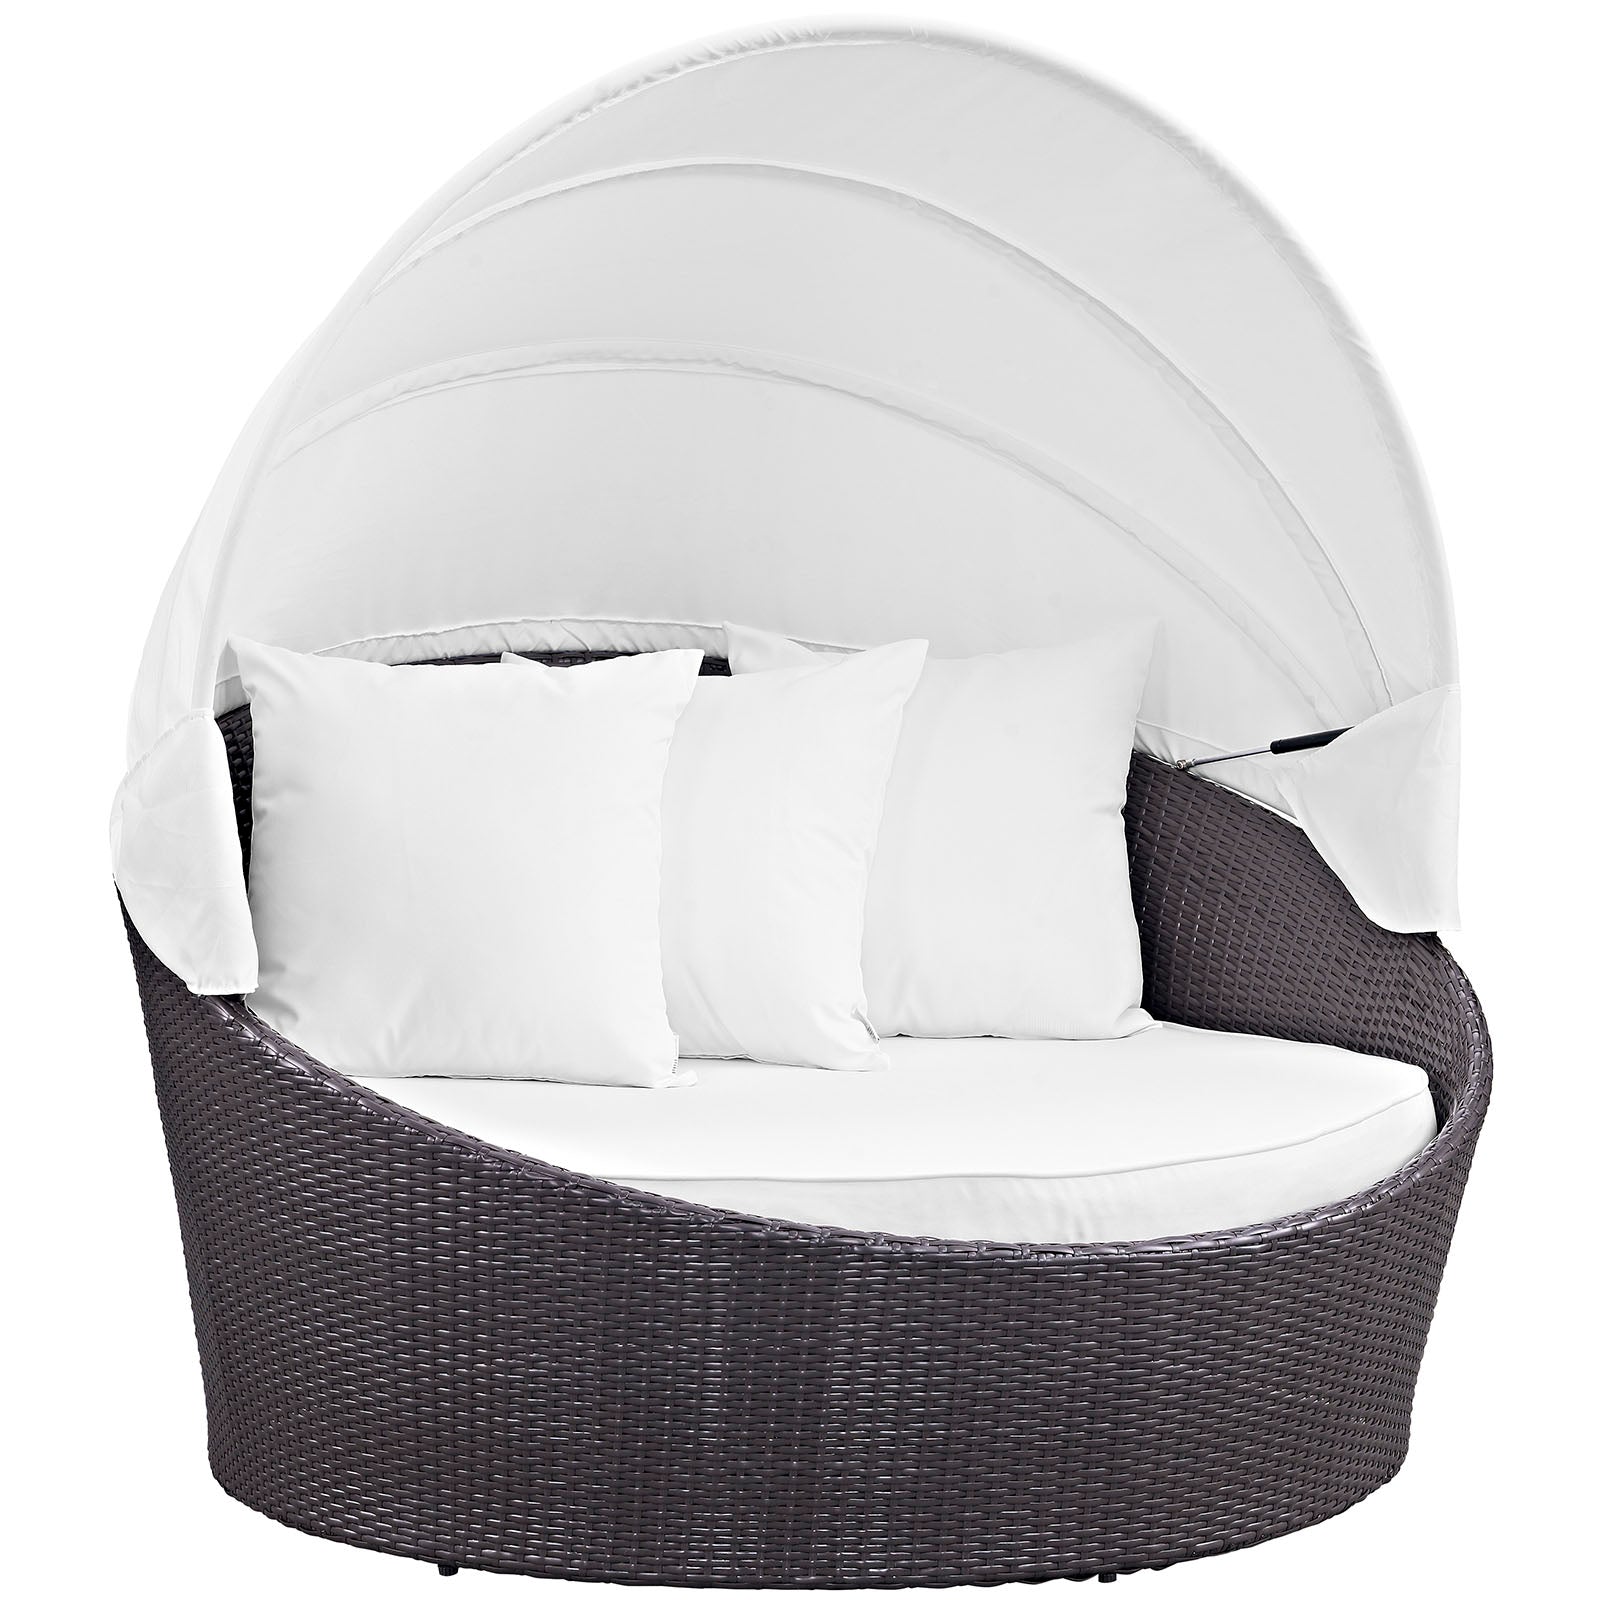 Modway Patio Daybeds - Convene Canopy Outdoor Patio 63"W Daybed Espresso White